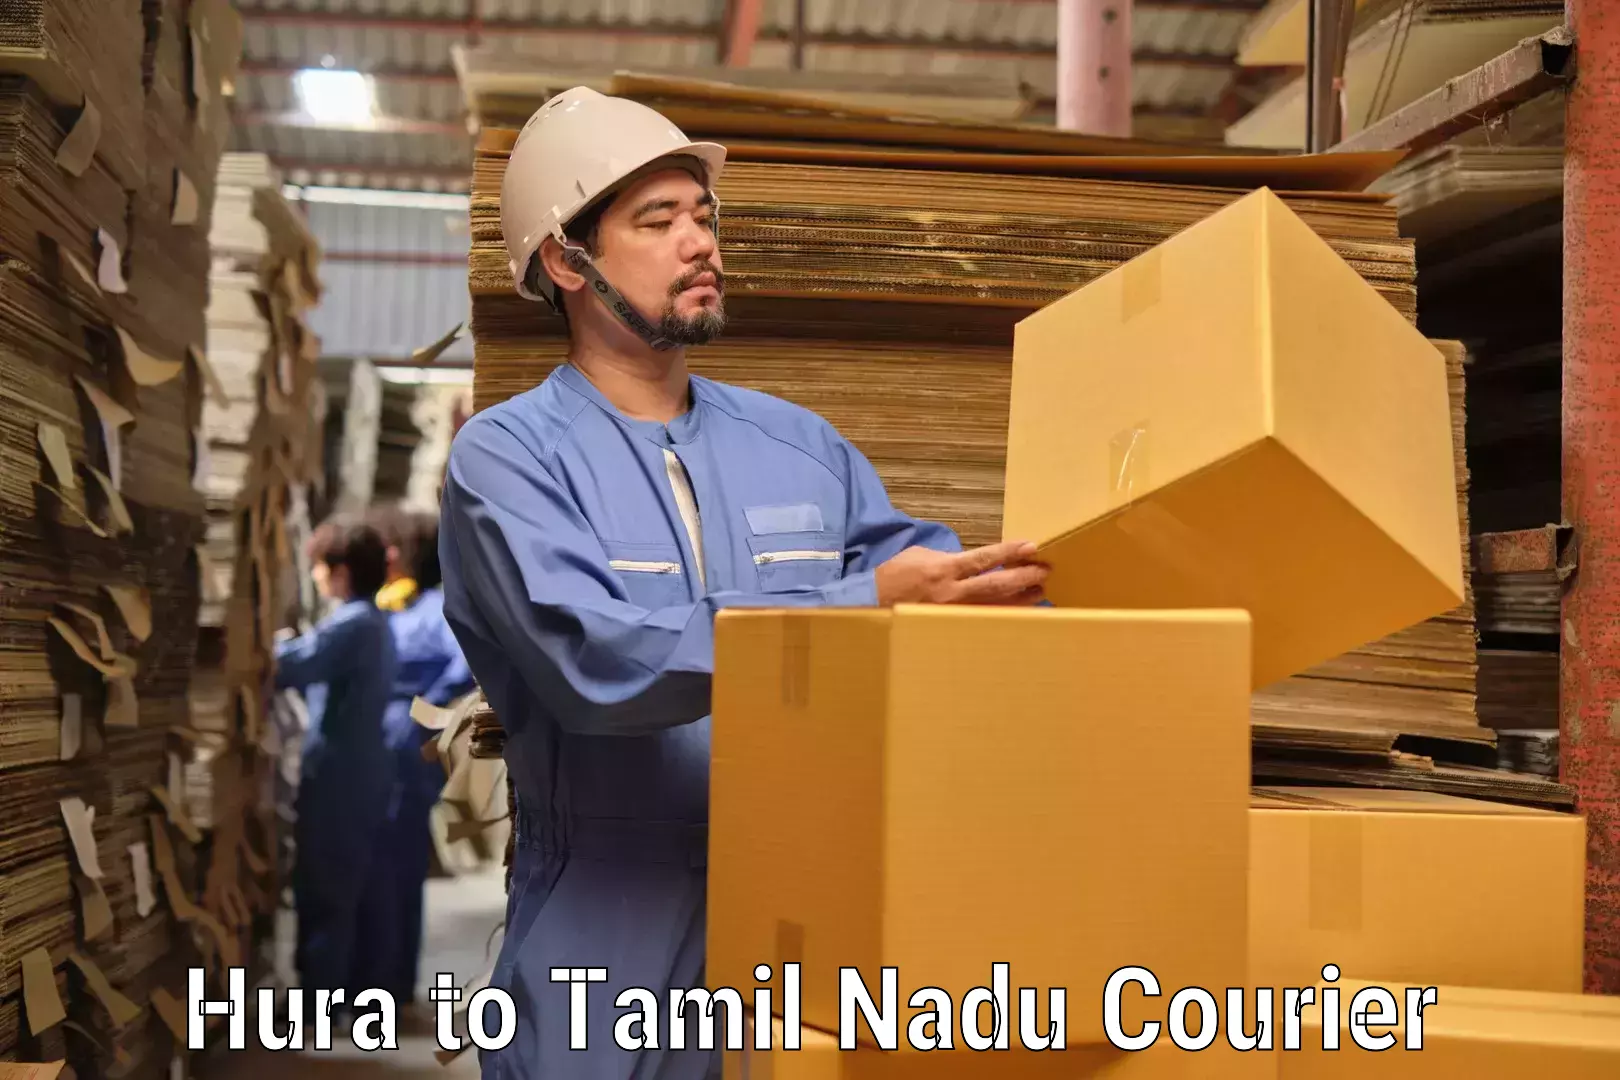 Global courier networks Hura to Tamil Nadu